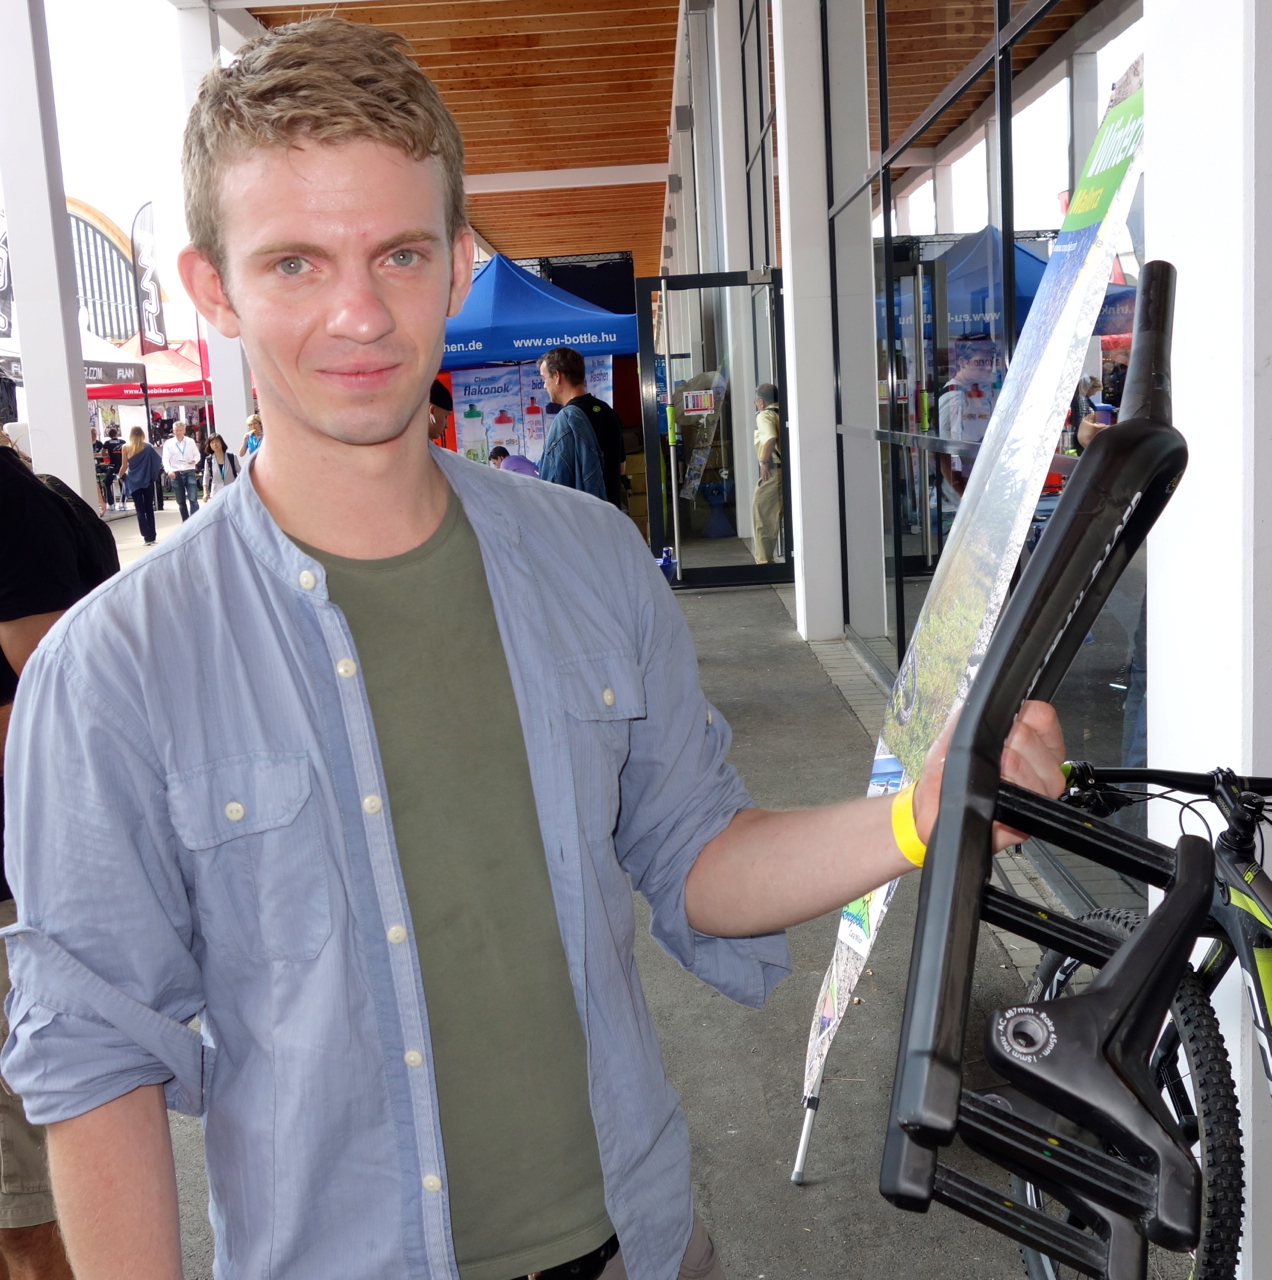 Co-founder and CEO Benedikt Skulason was inspired by high-tech athletic prosthetics